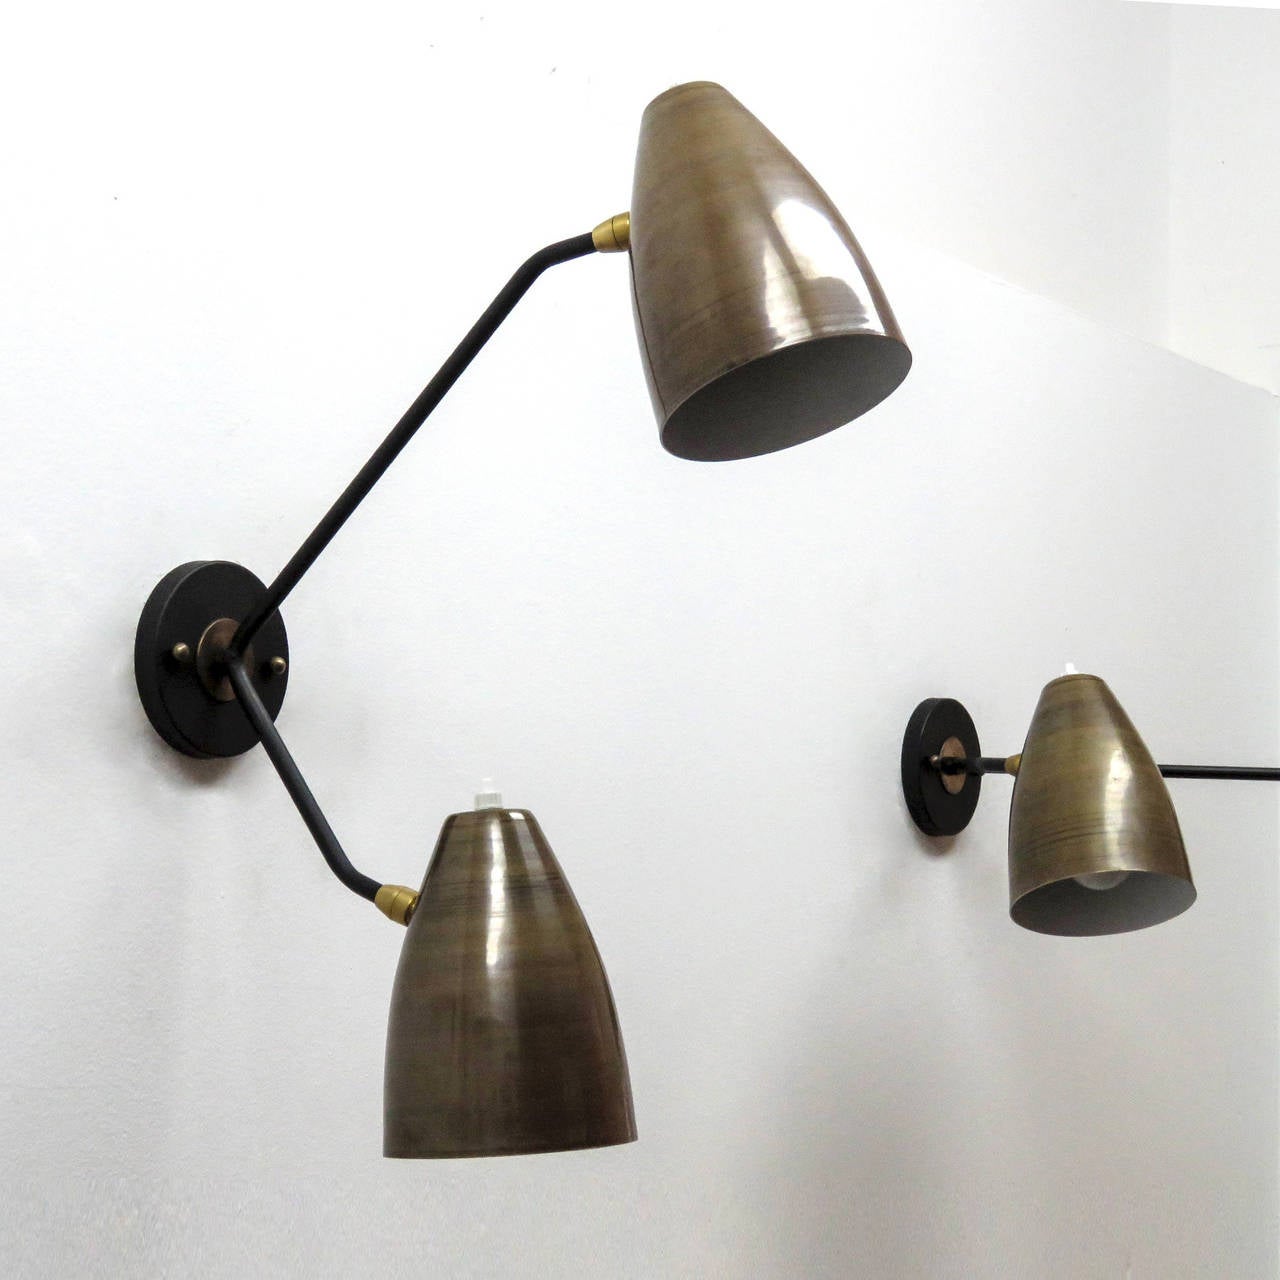 Wonderful asymmetrical double-arm wall lights by Gallery L7, handcrafted and finished in Los Angeles with two fully adjustable raw brass shades with white enameled interiors on black enameled arms, can be mounted vertically or horizontally, each